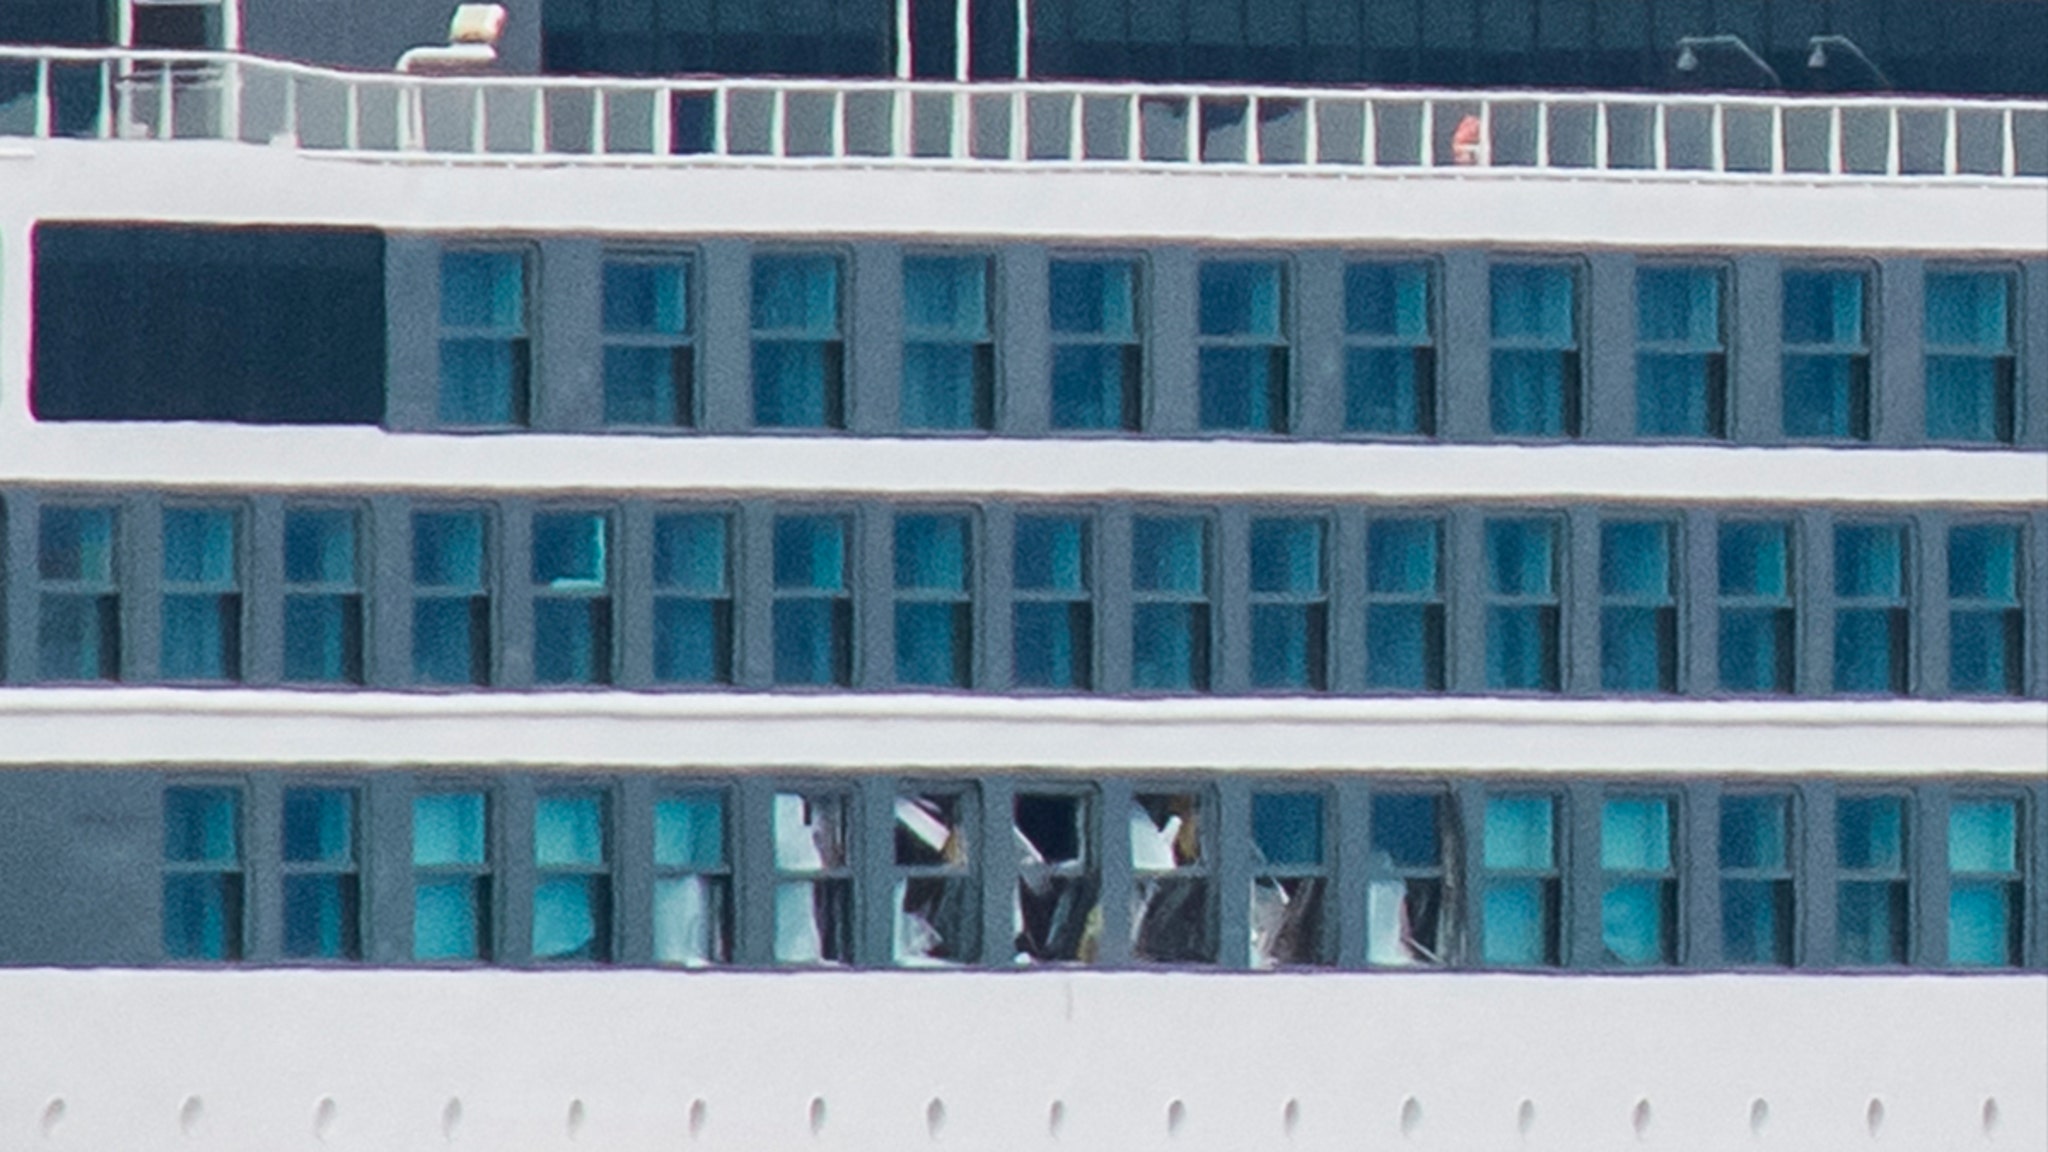 1 Dead, 4 Injured After Huge ‘Rogue Wave’ Smashes Into Cruise Ship Window